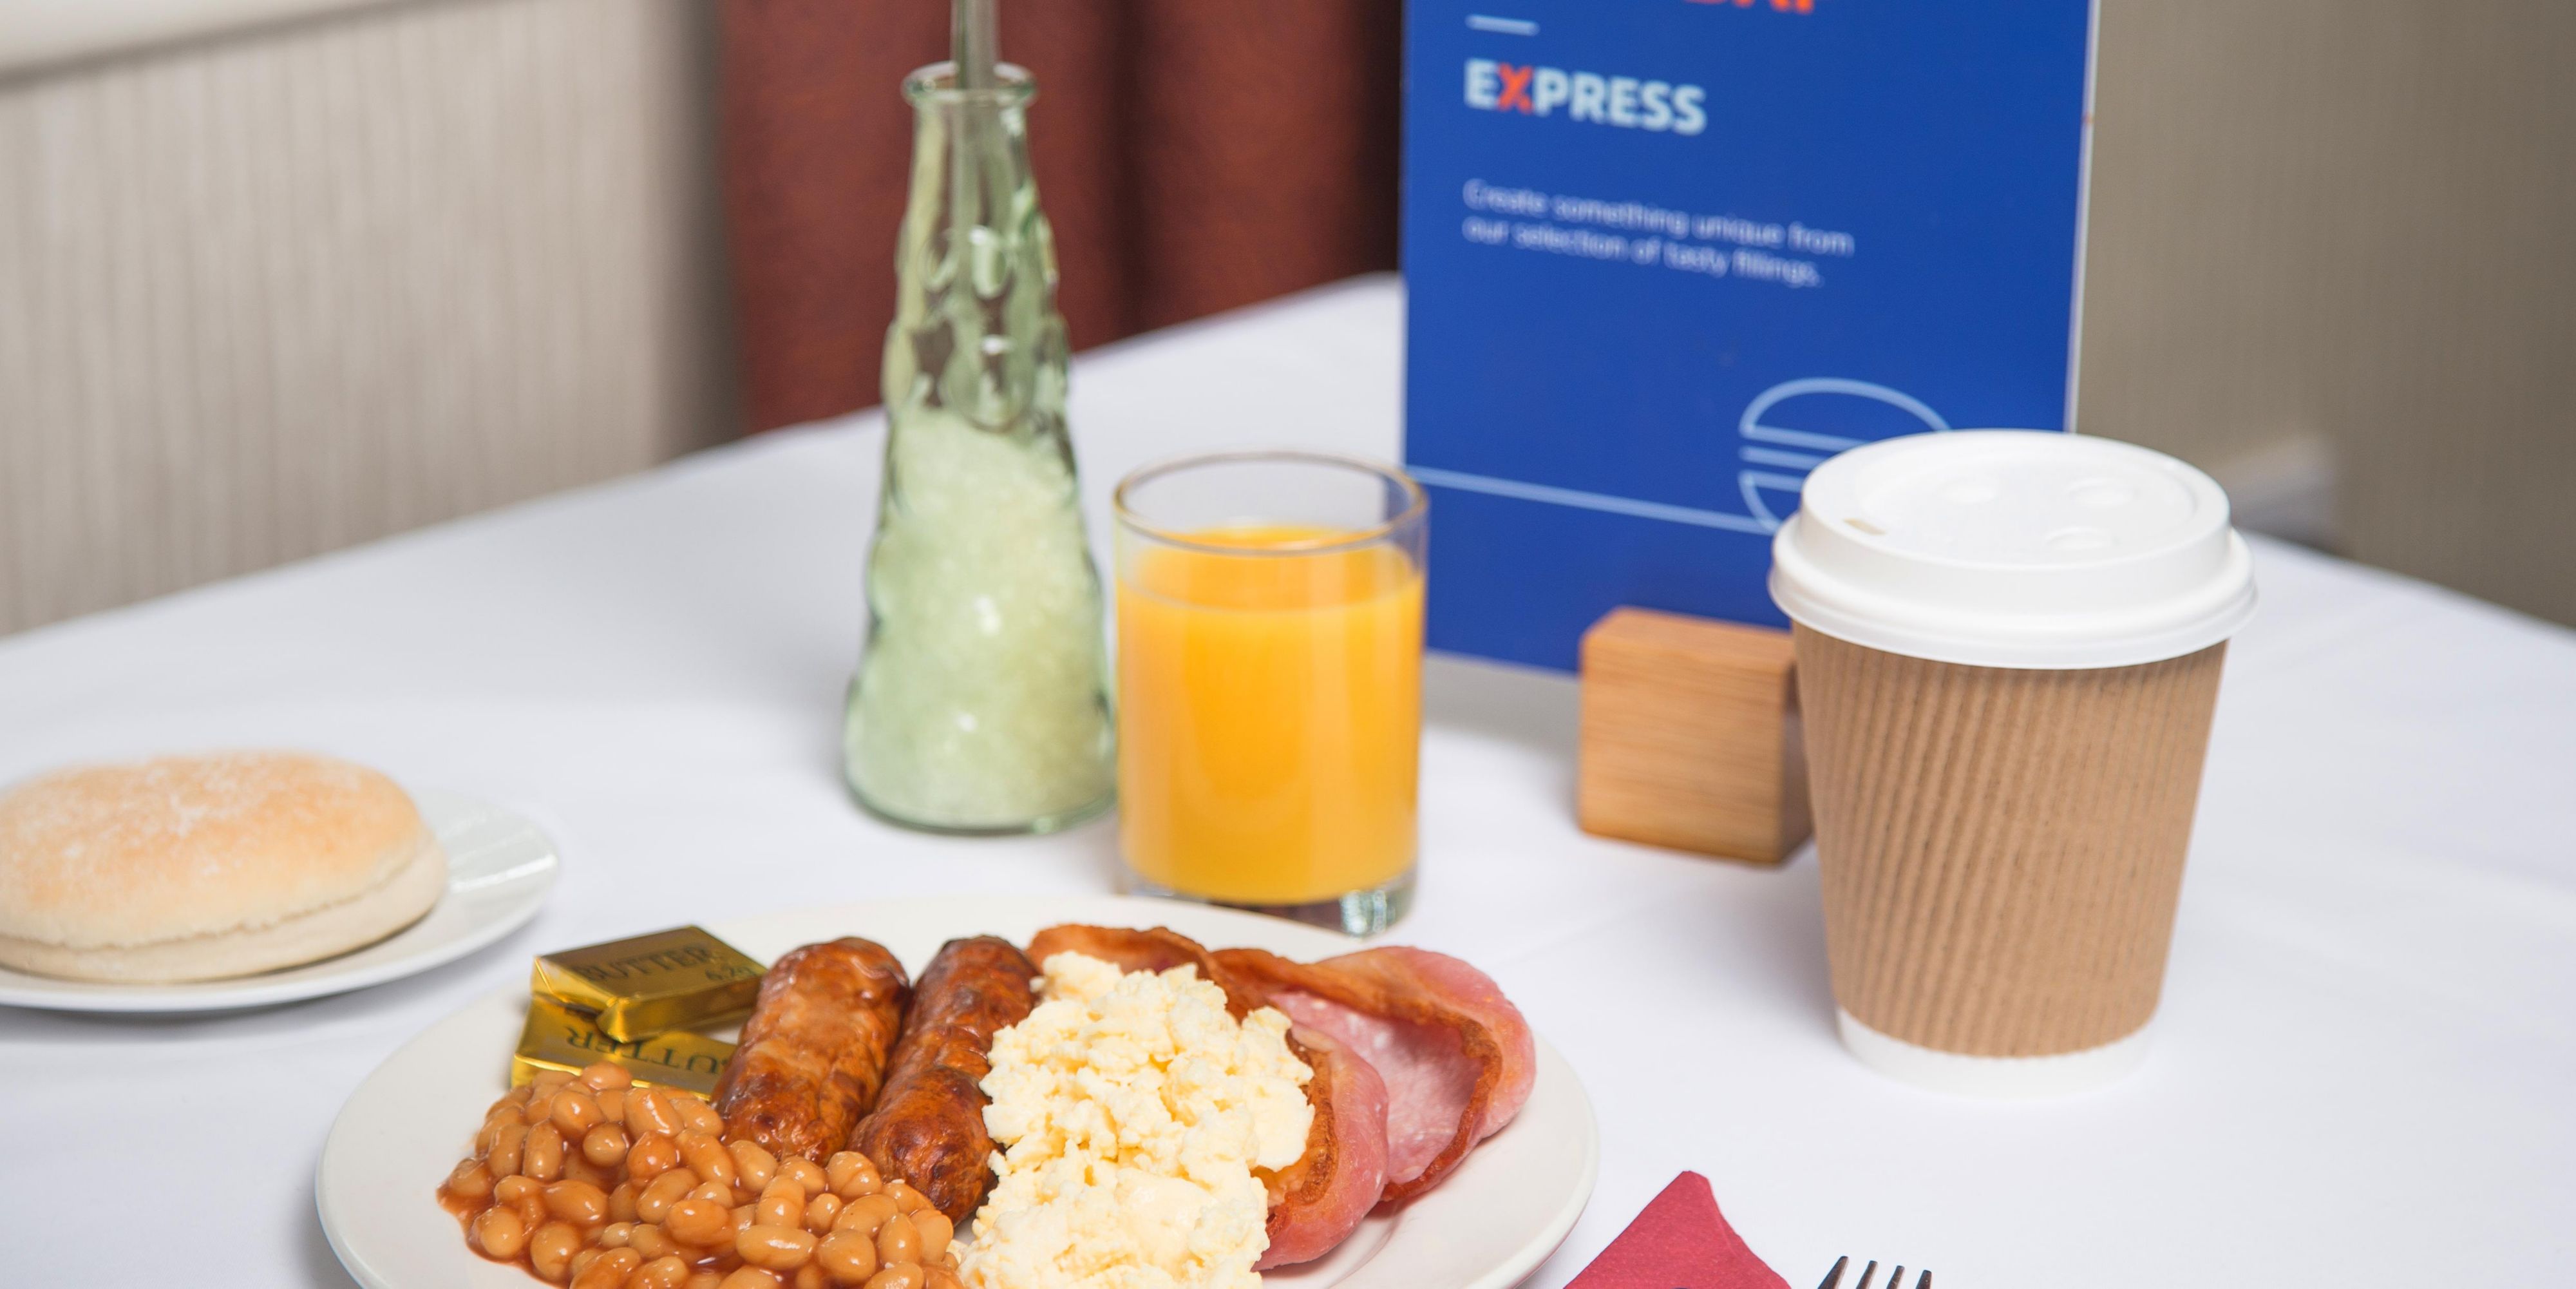 Awaken your appetite with a plentiful continental buffet breakfast including croissants, muffins, fresh fruit, cereals, yoghurt, scrambled eggs, sausages and baked beans, as well as a choice of fruit juices and unlimited tea and coffee.